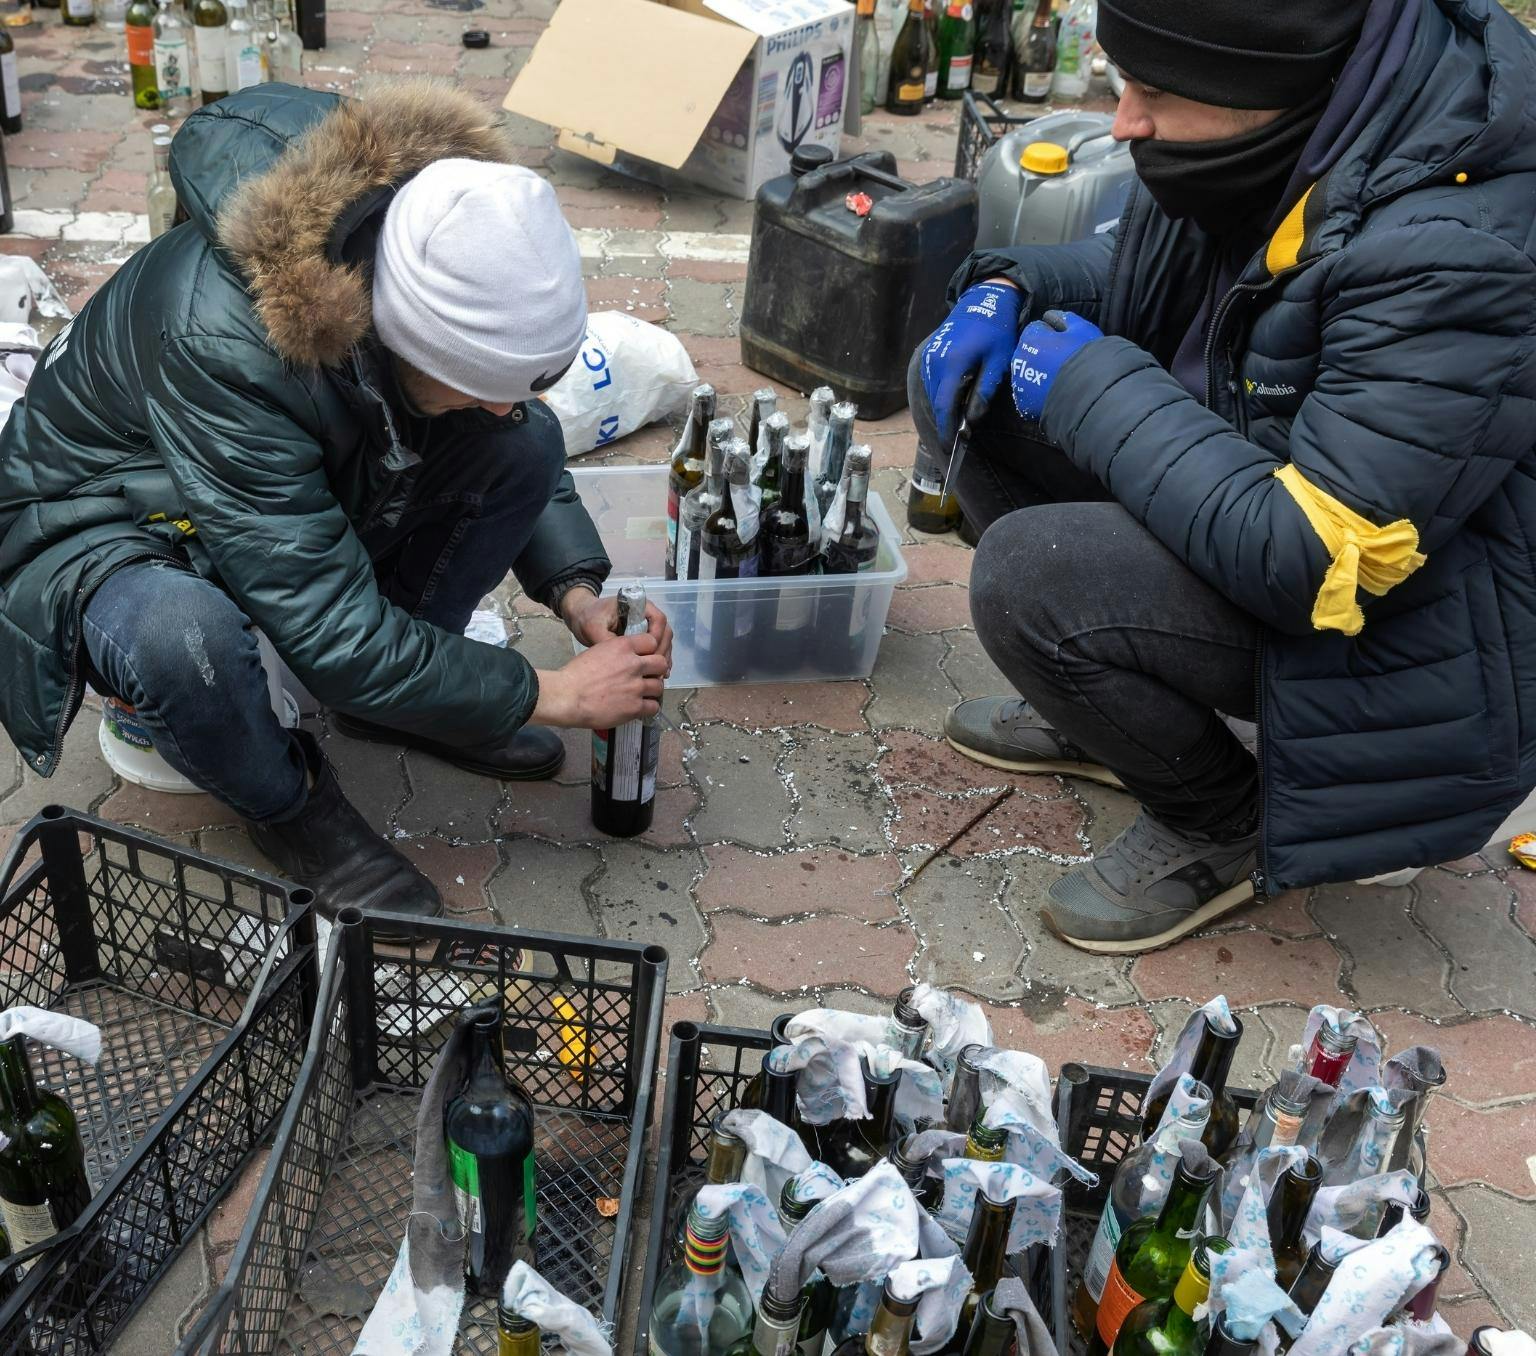 Two people wearing beanies and dark puffer jackets are crouched on the ground. One is holding a tall brown bottle. On the ground in front of them are small black crates filled with bottles with white cloths coming out of the top. In the background are plastic fuel storage containers and empty wine bottles.